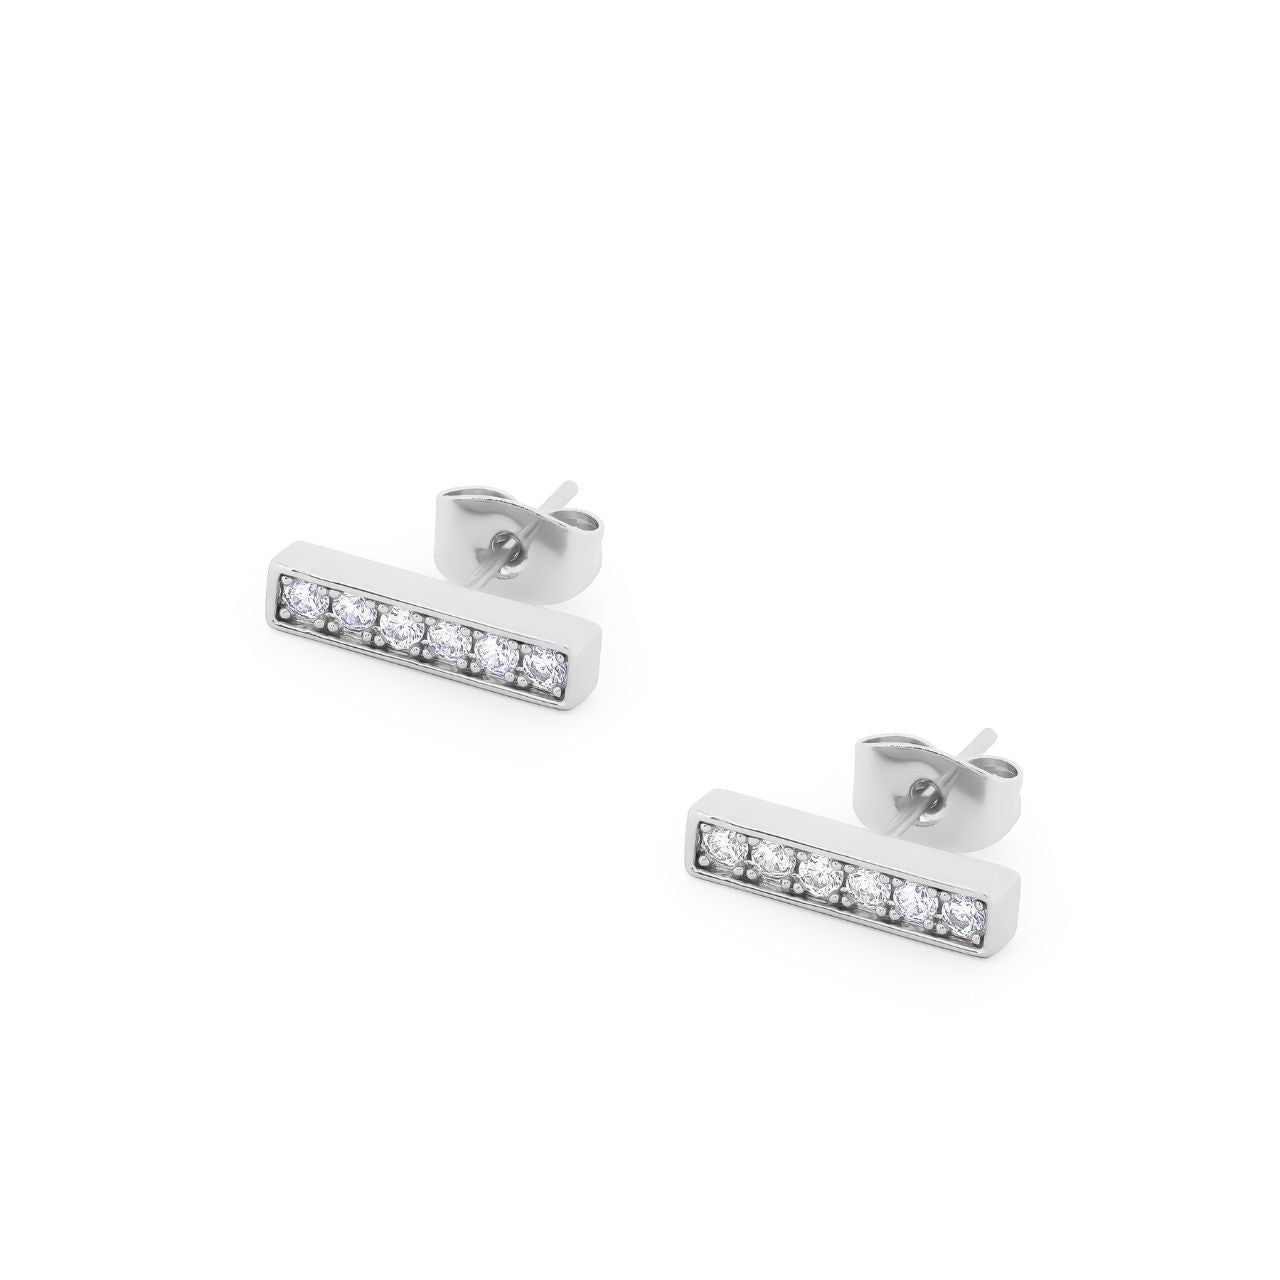 T-Bar Stud Earrings Silver Set With CZ by Tipperary  These Tipperary T-Bar Earrings are the perfect addition to any ensemble. Lightweight and flexible, providing a comfortable fit for any wearer. The T-bar design offers an understated yet luxurious look, certain to elevate any look.